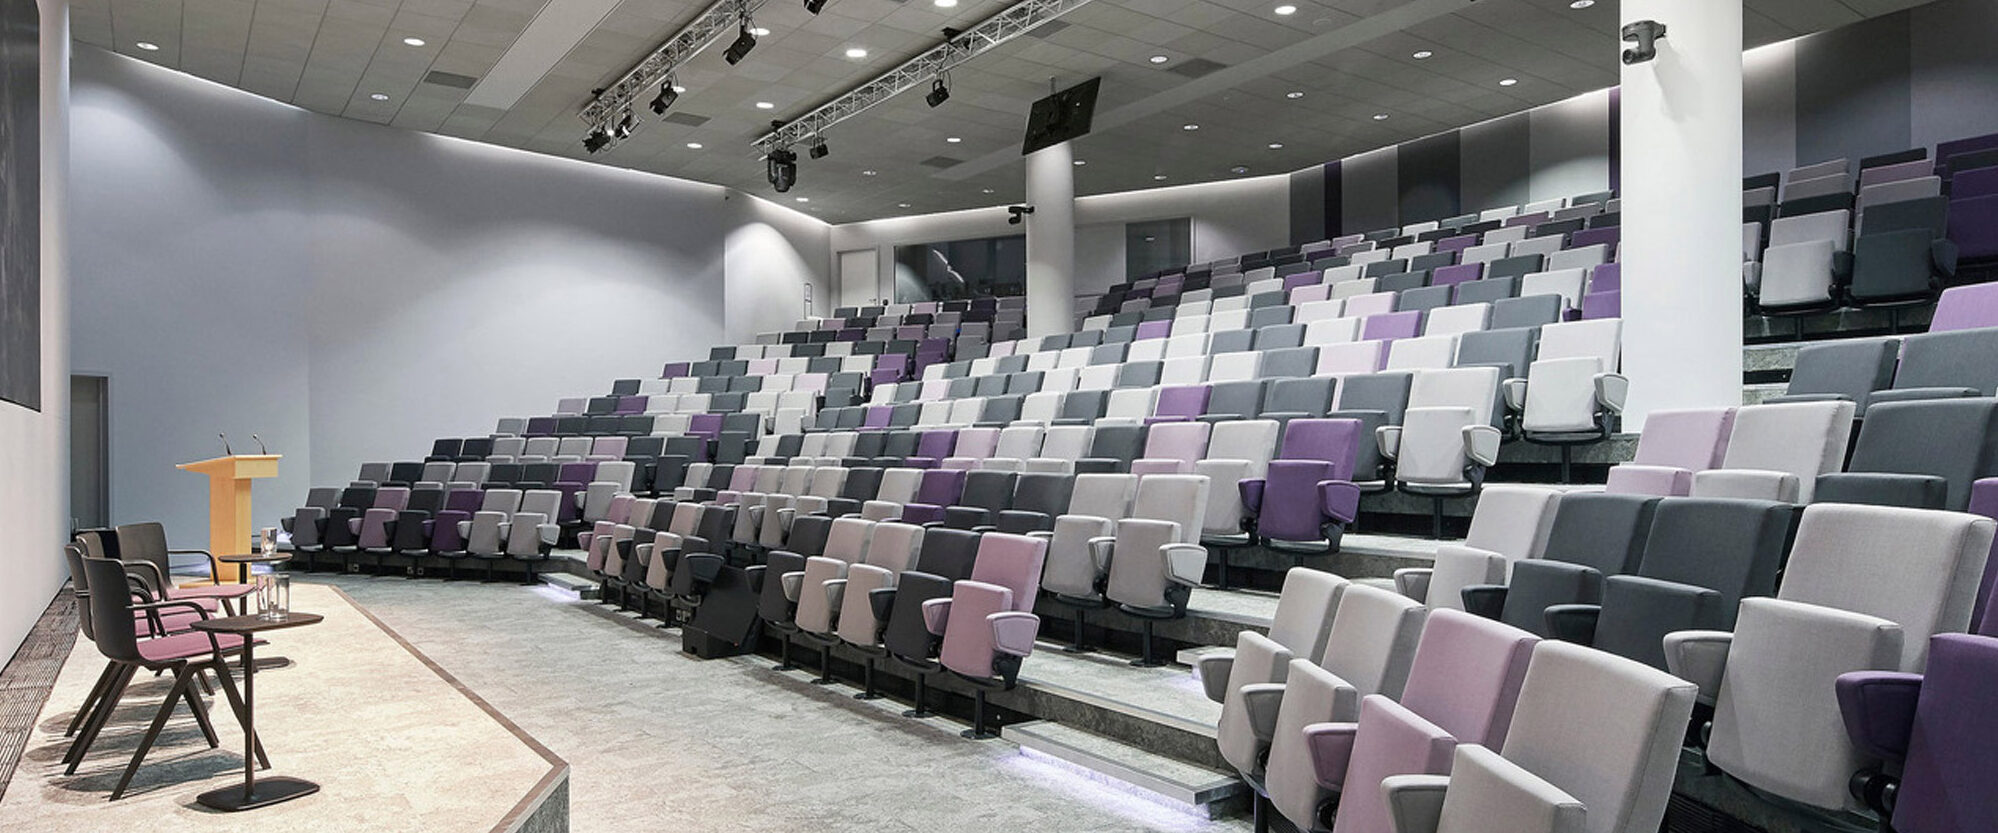 Contemporary auditorium with tiered seating featuring shades of gray and purple upholstered chairs, focused lighting from ceiling spots and ambient wall fixtures, and a central stage with a wooden podium flanked by chairs.